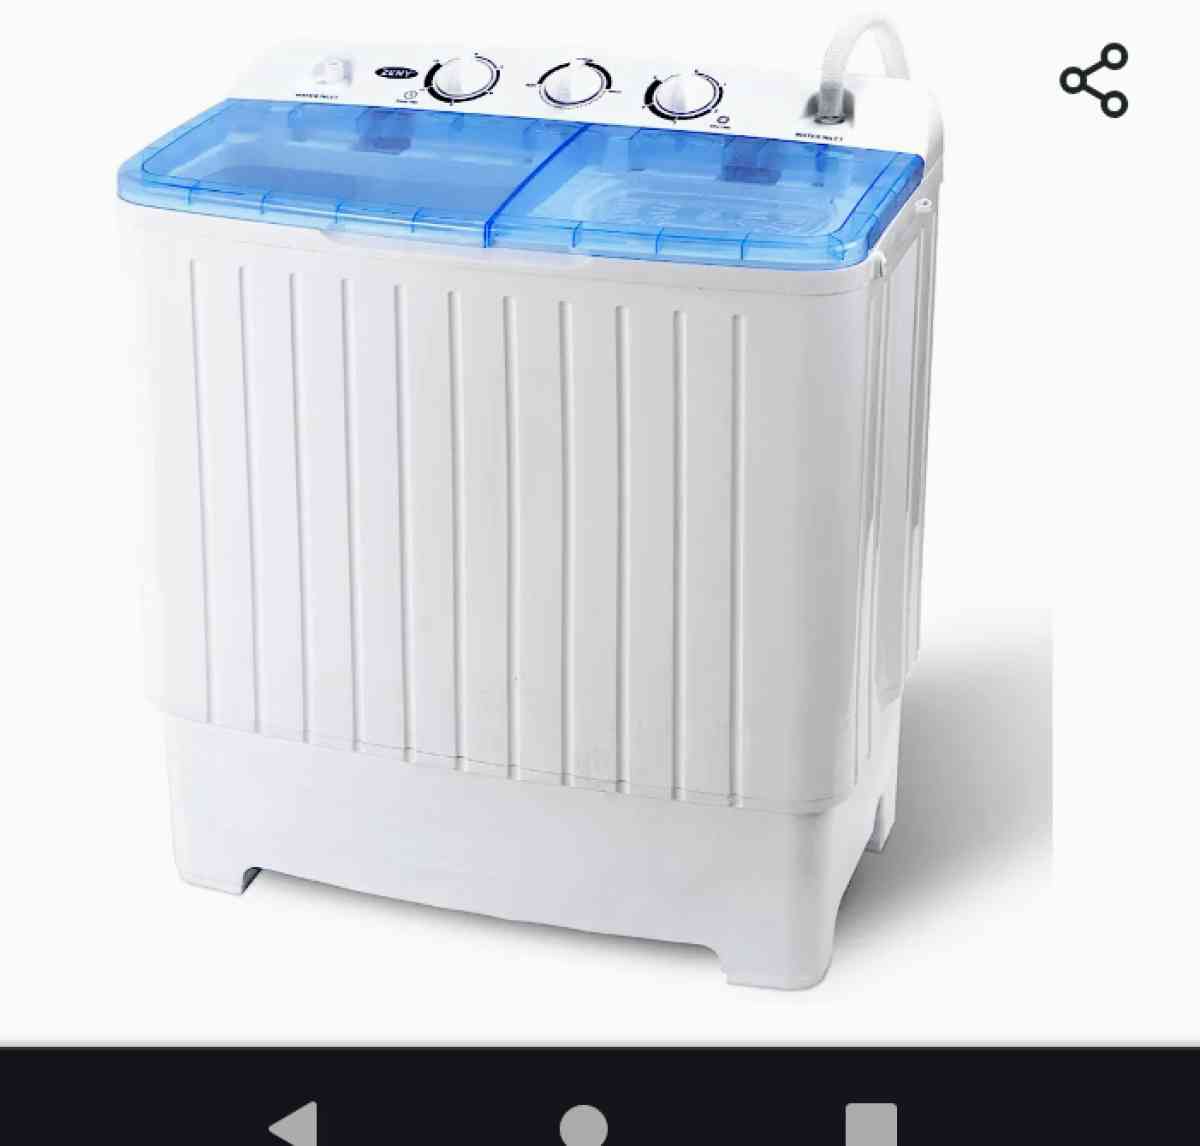 its compact portable washer and dryer two in one